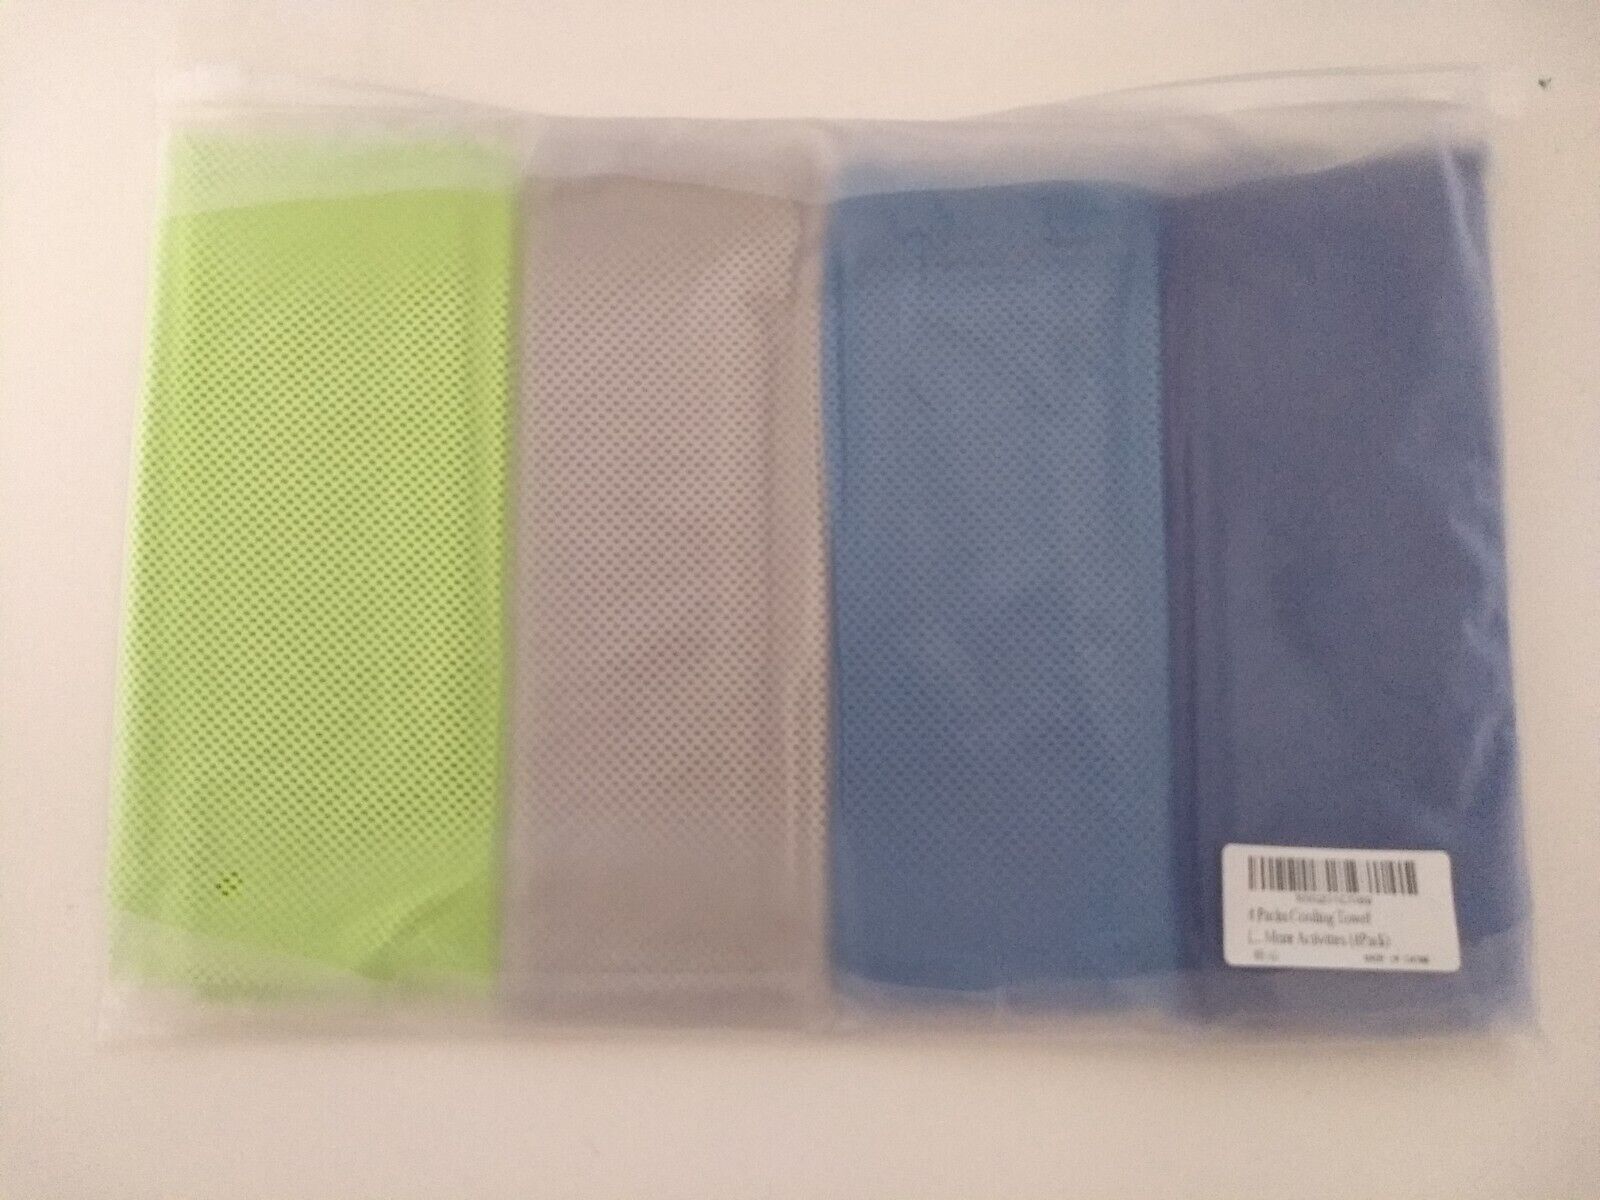 Nip 4 Pack Cooling Towels Running Jogging Gym Yoga Camping Workout Sports